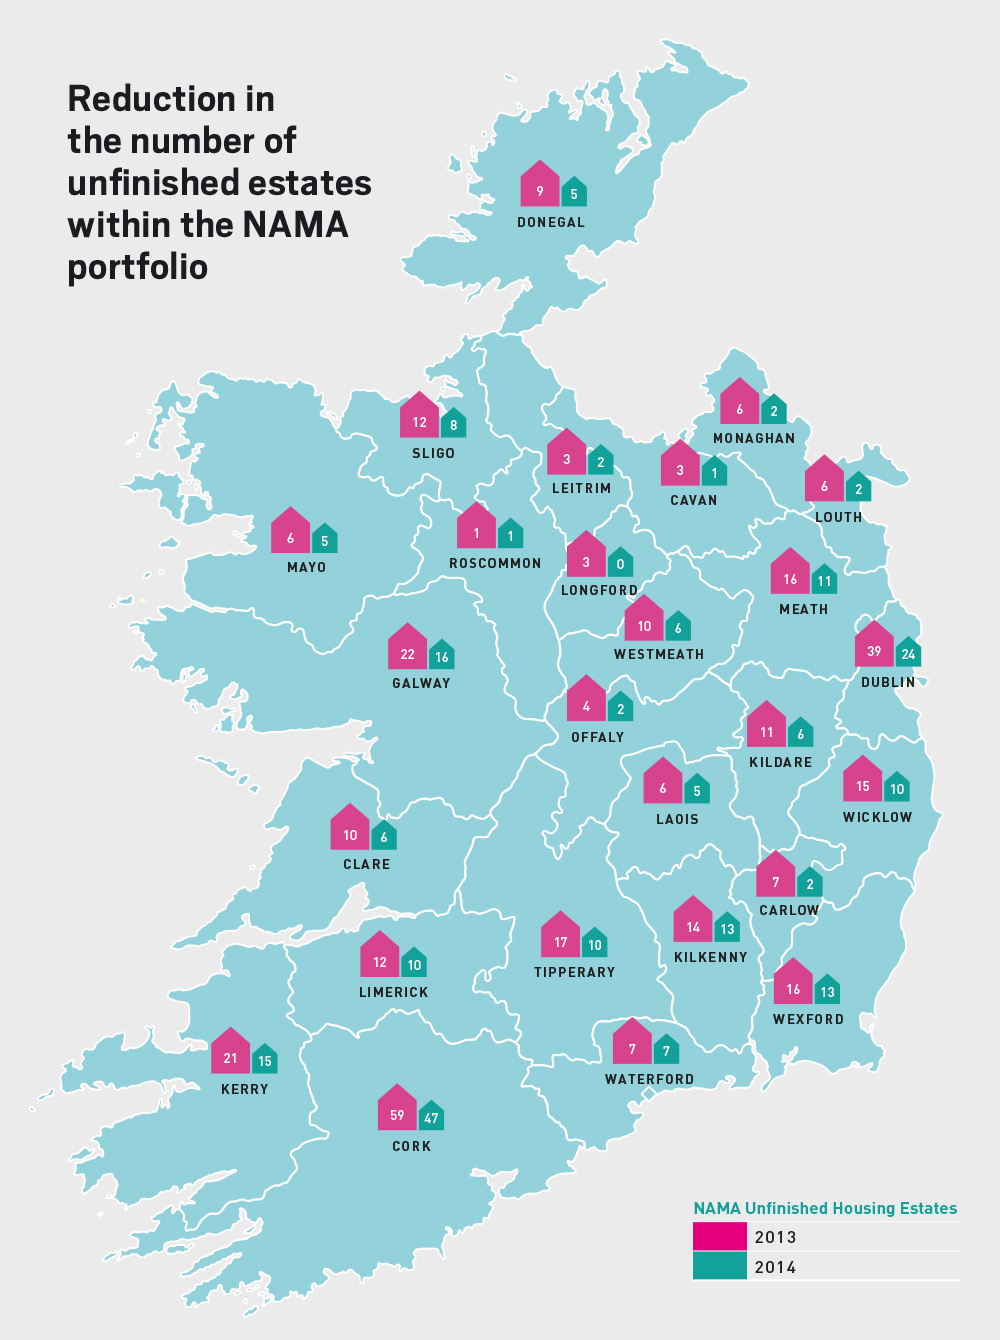 Reduction in the number of unfinished estates within the NAMA portfolio